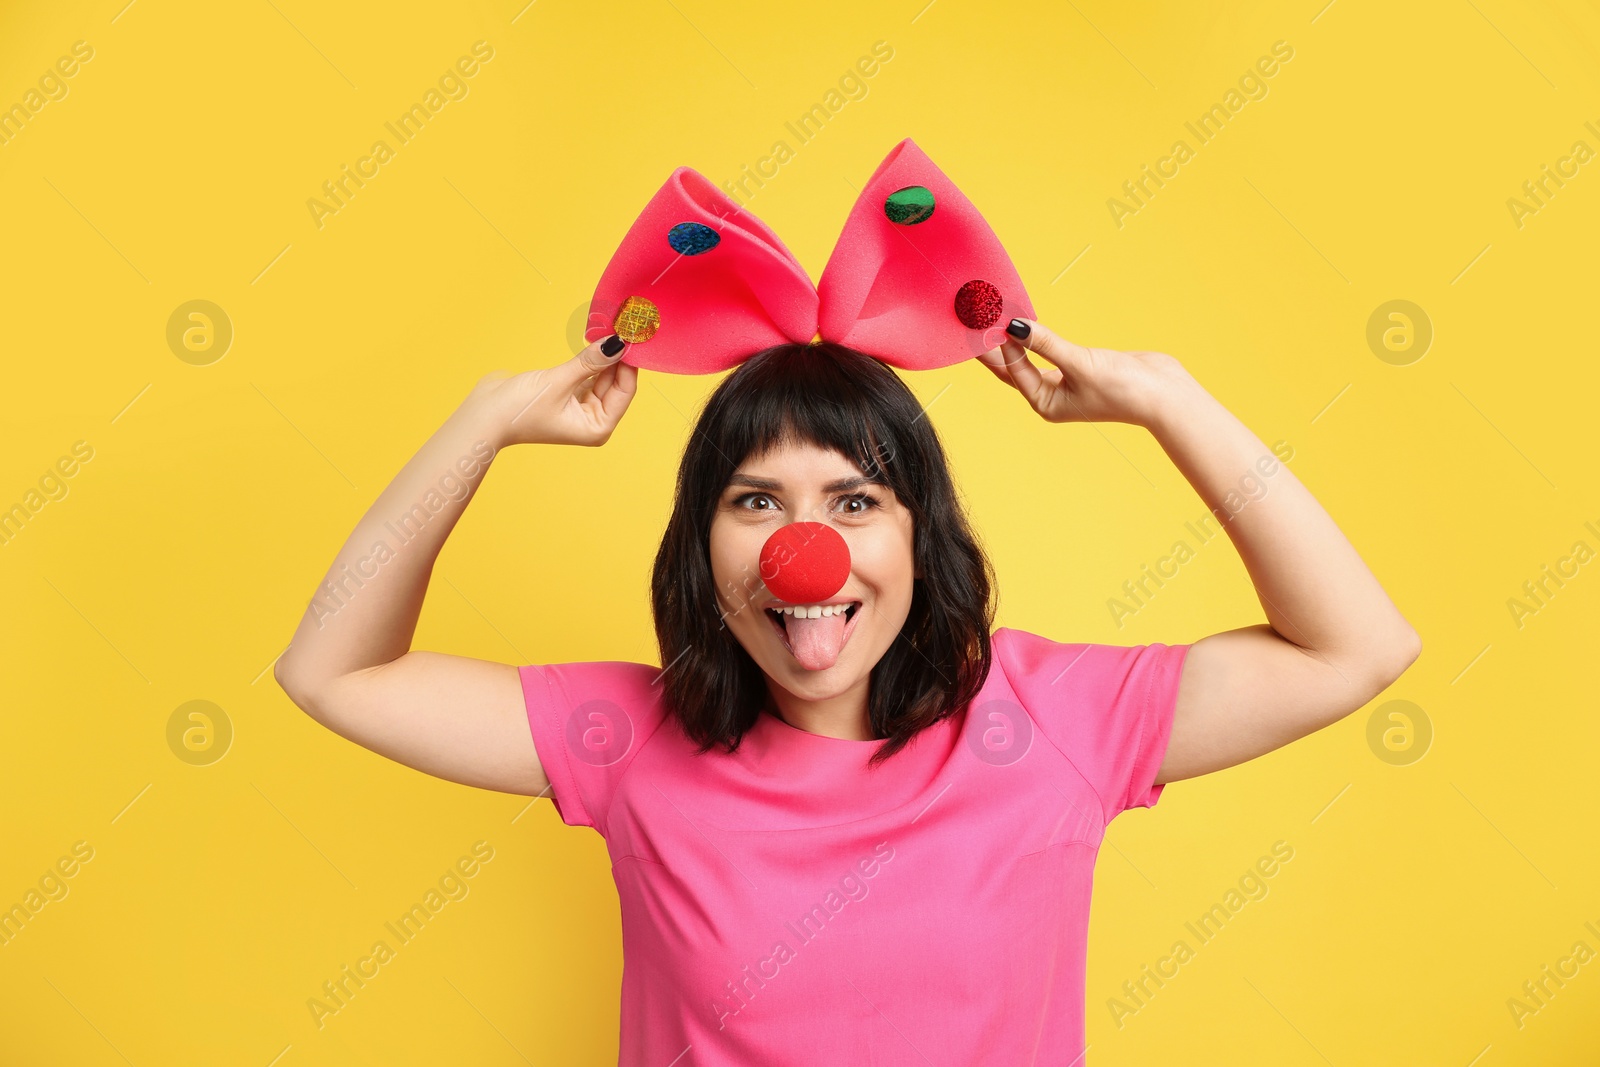 Photo of Funny woman with large bow and clown nose on yellow background. April fool's day